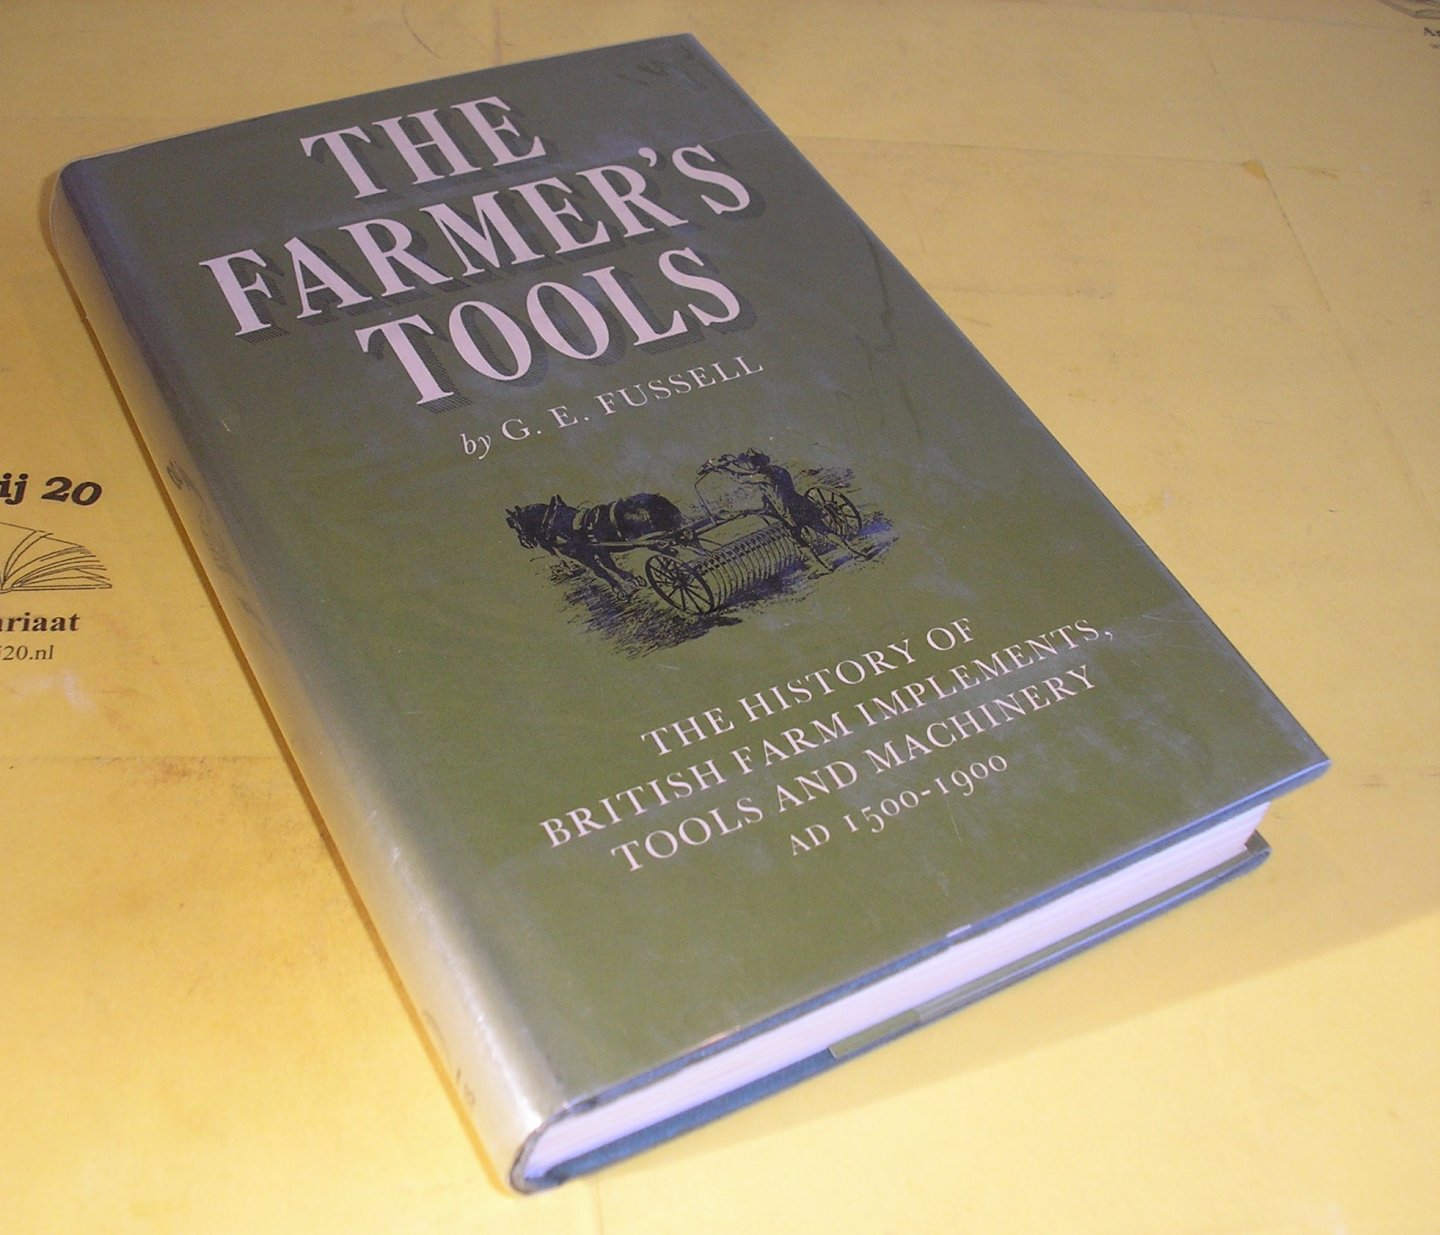 Fussell, G.E. - The farmer's tools. The history of British farm implements , tools and machinery ad 1500-1900.